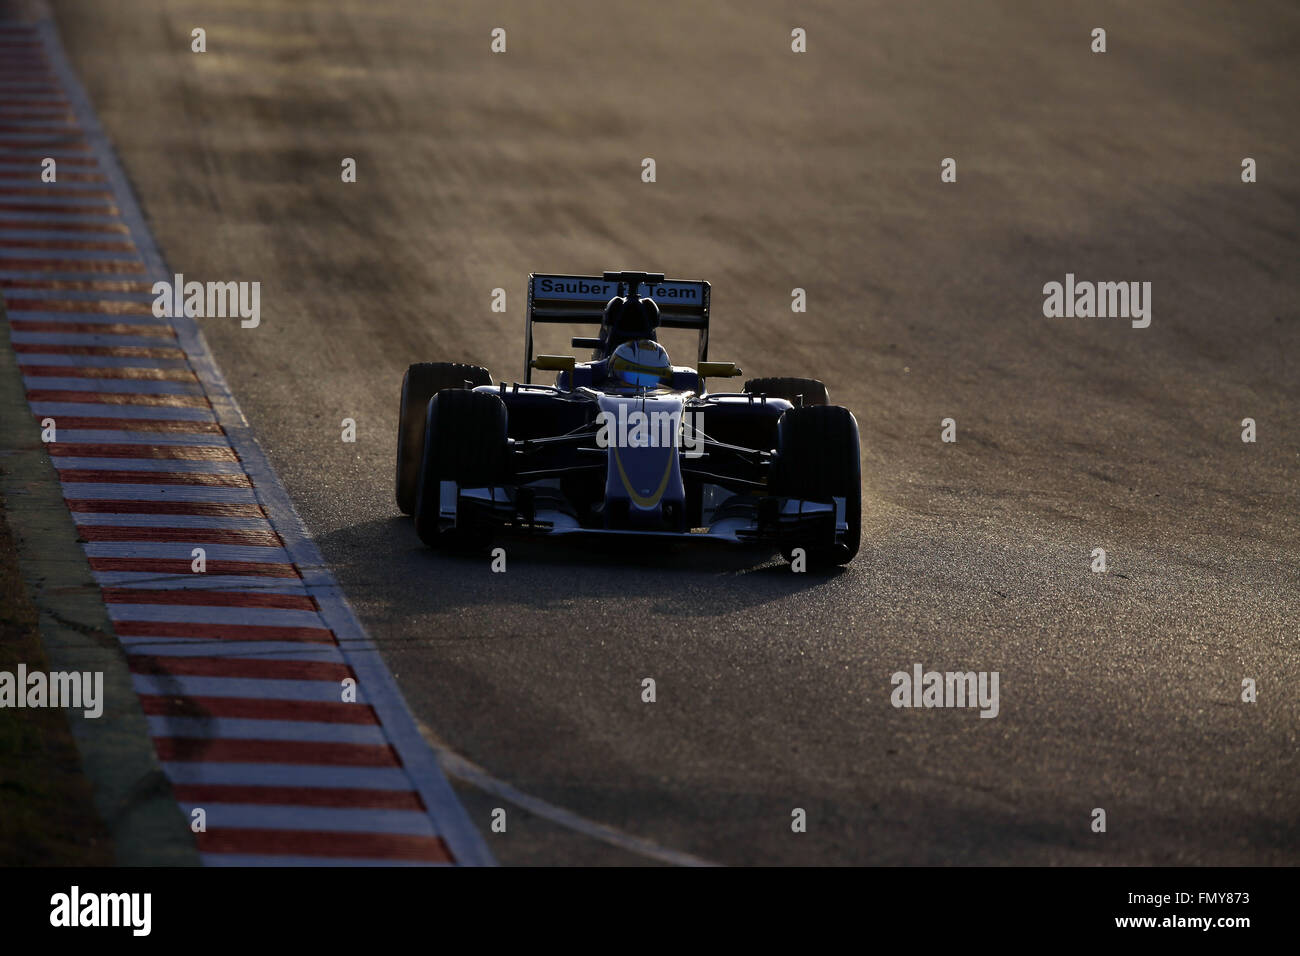 Swedish Formula One driver Marcus Ericsson of Sauber steers his car during the training session for the upcoming Formula One season at the Circuit de Barcelona - Catalunya in Barcelona, Spain, 23 February 2016. Photo: Jens Buettner/dpa Stock Photo